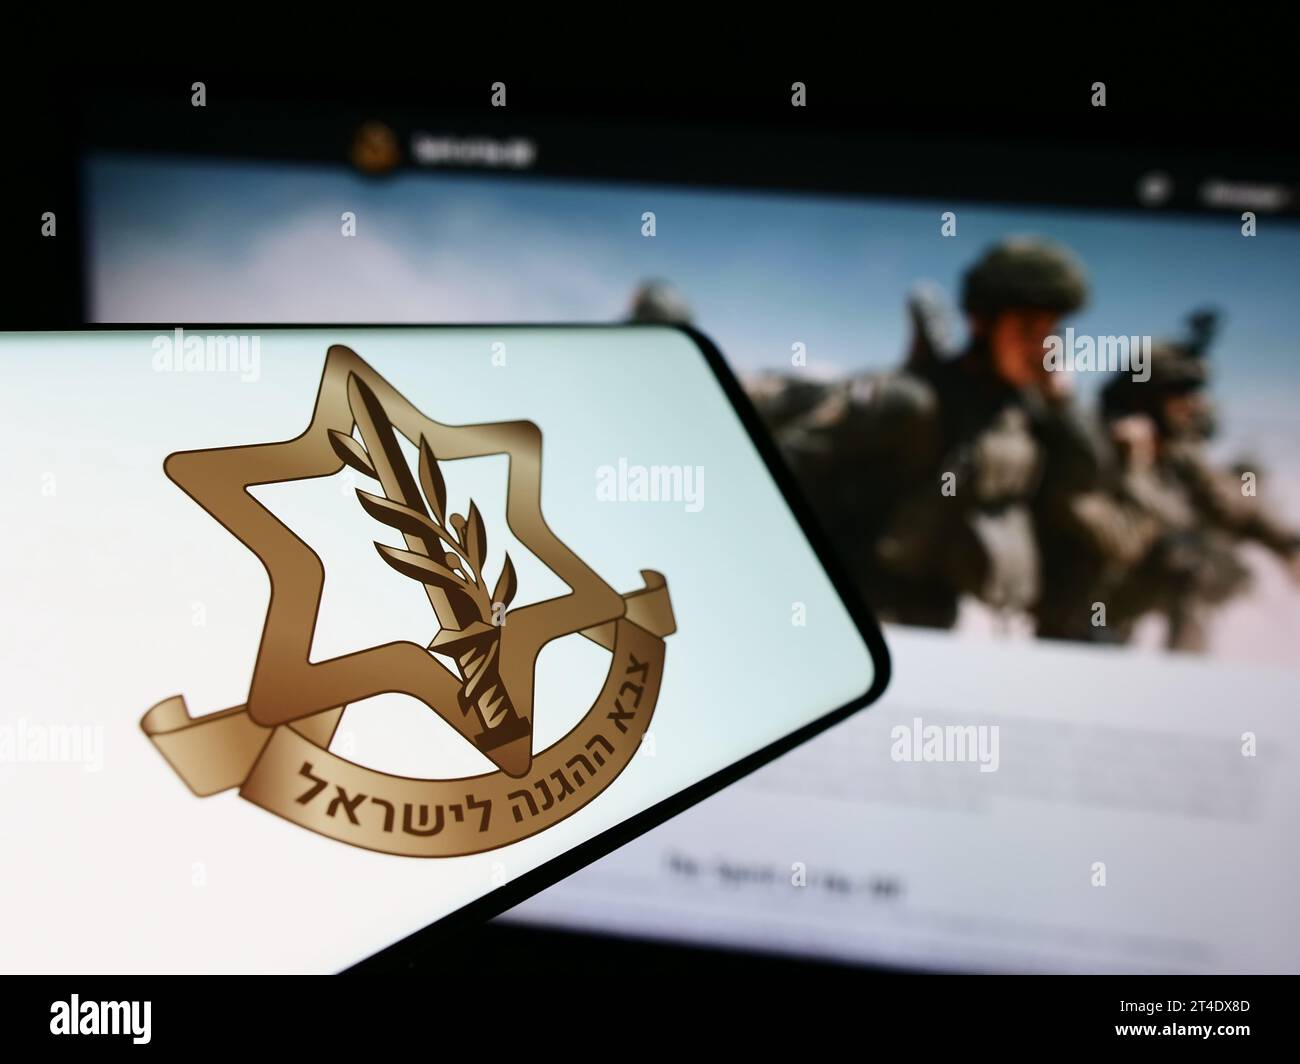 Smartphone with logo of national military Israel Defense Forces (IDF) in front of website. Focus on center-left of phone display. Stock Photo